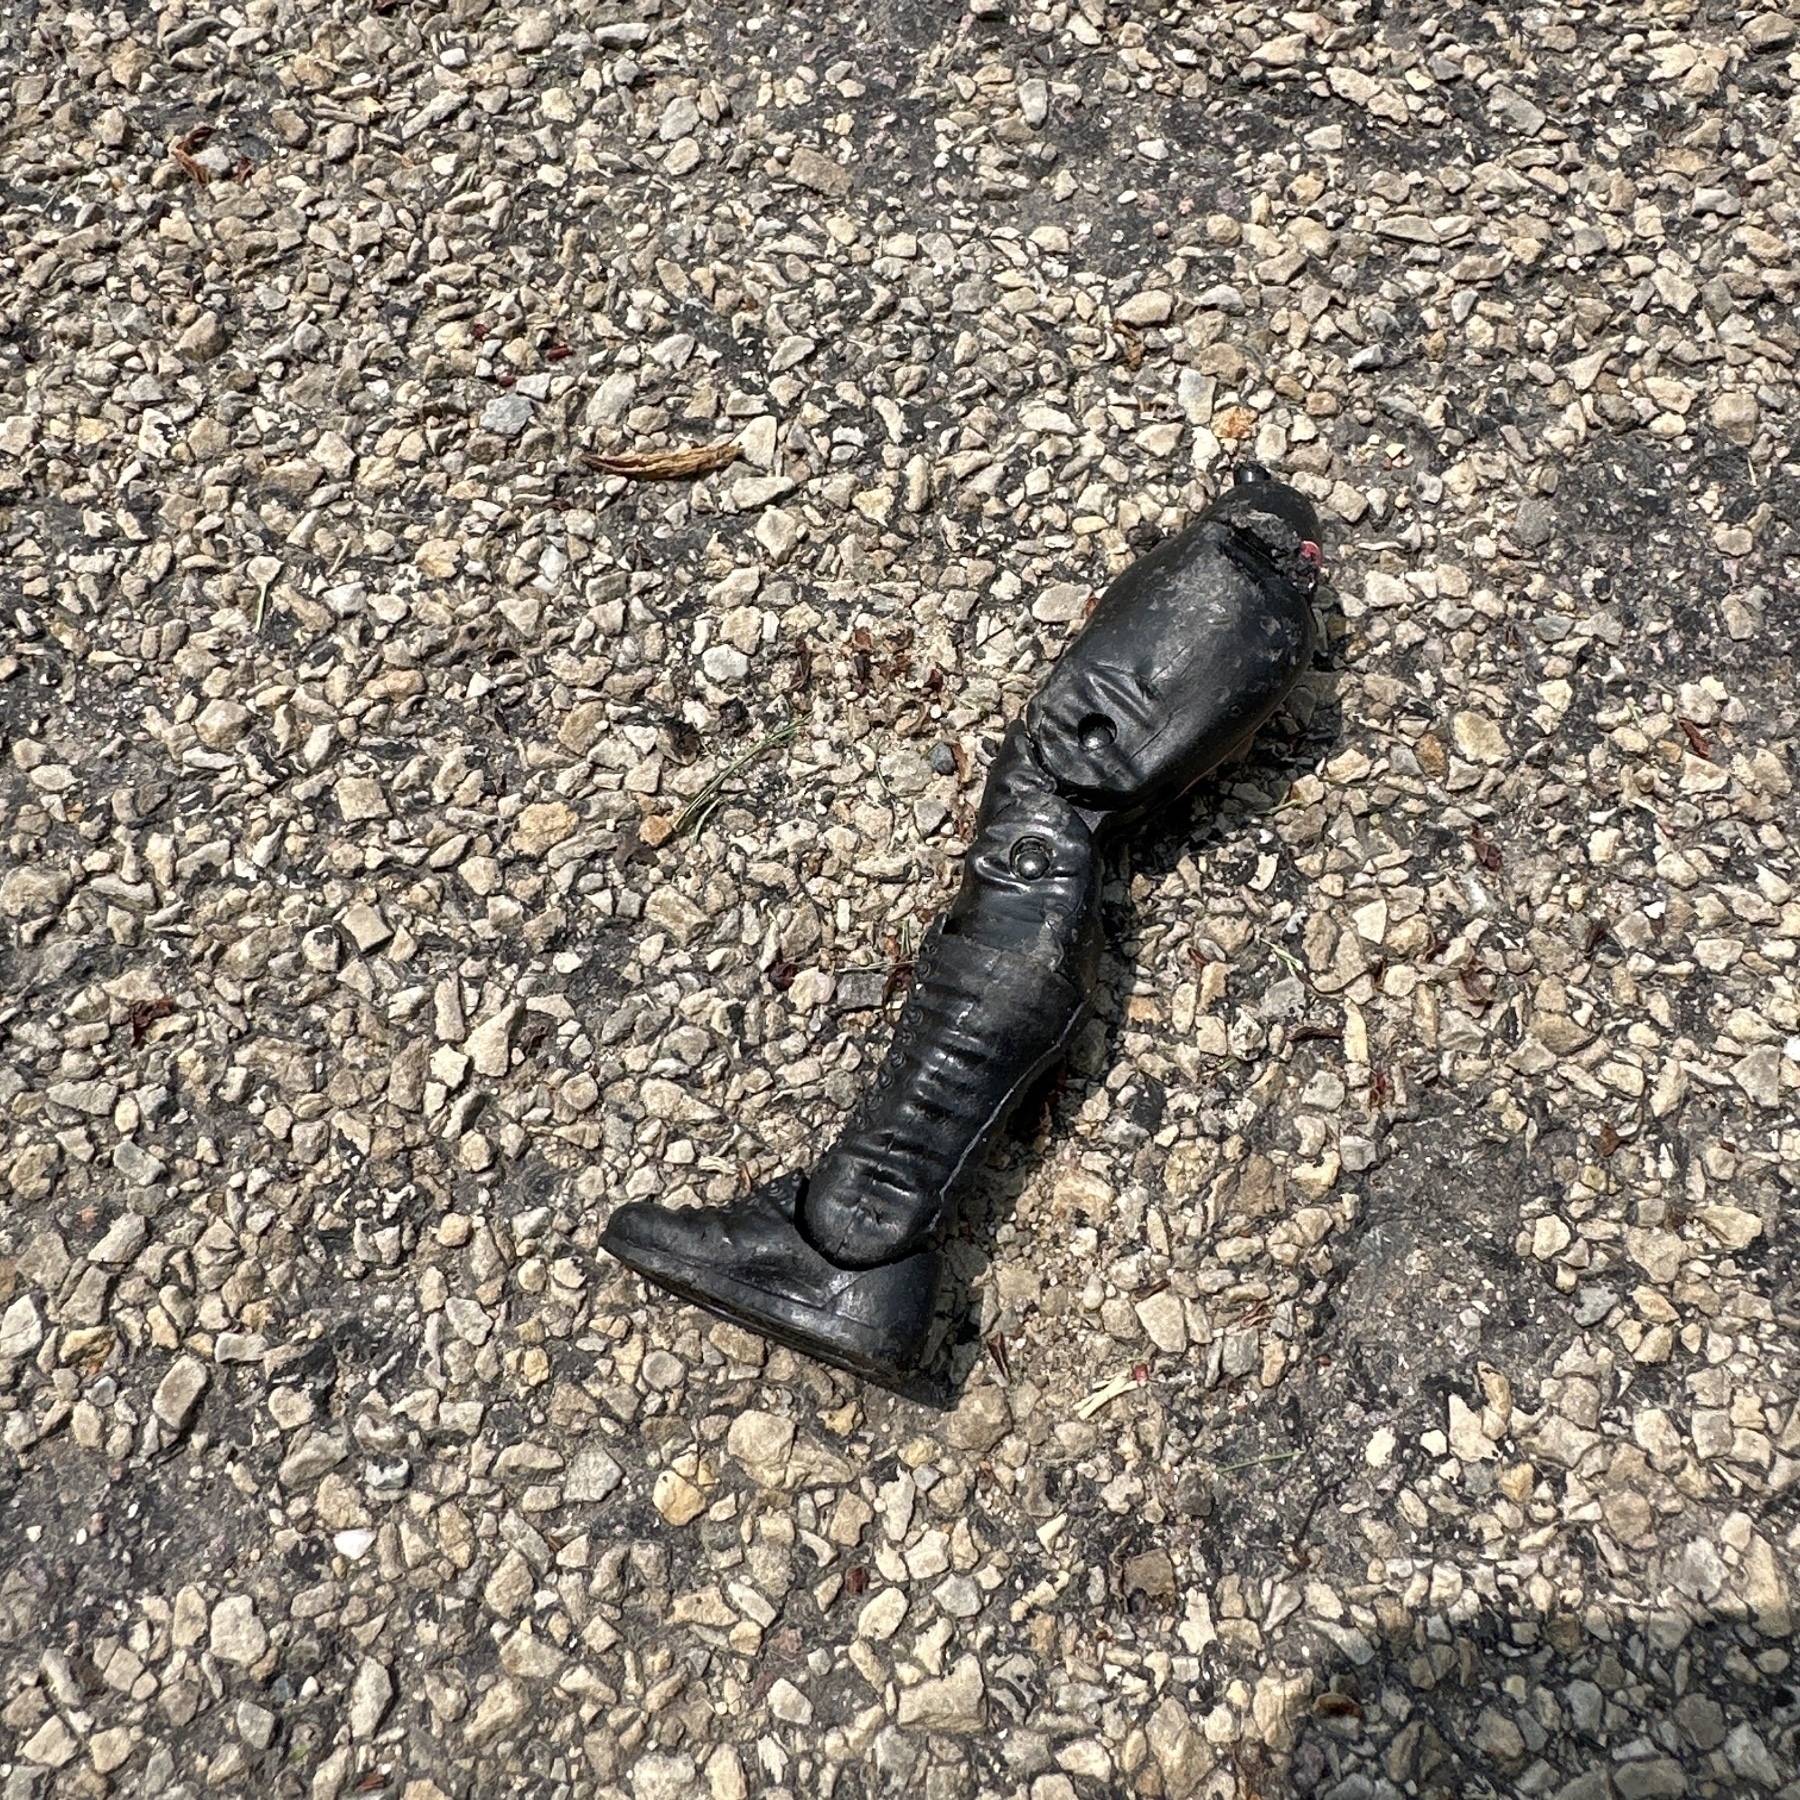 An action figure leg, detached from the action figure's body and sitting on the pavement of a street